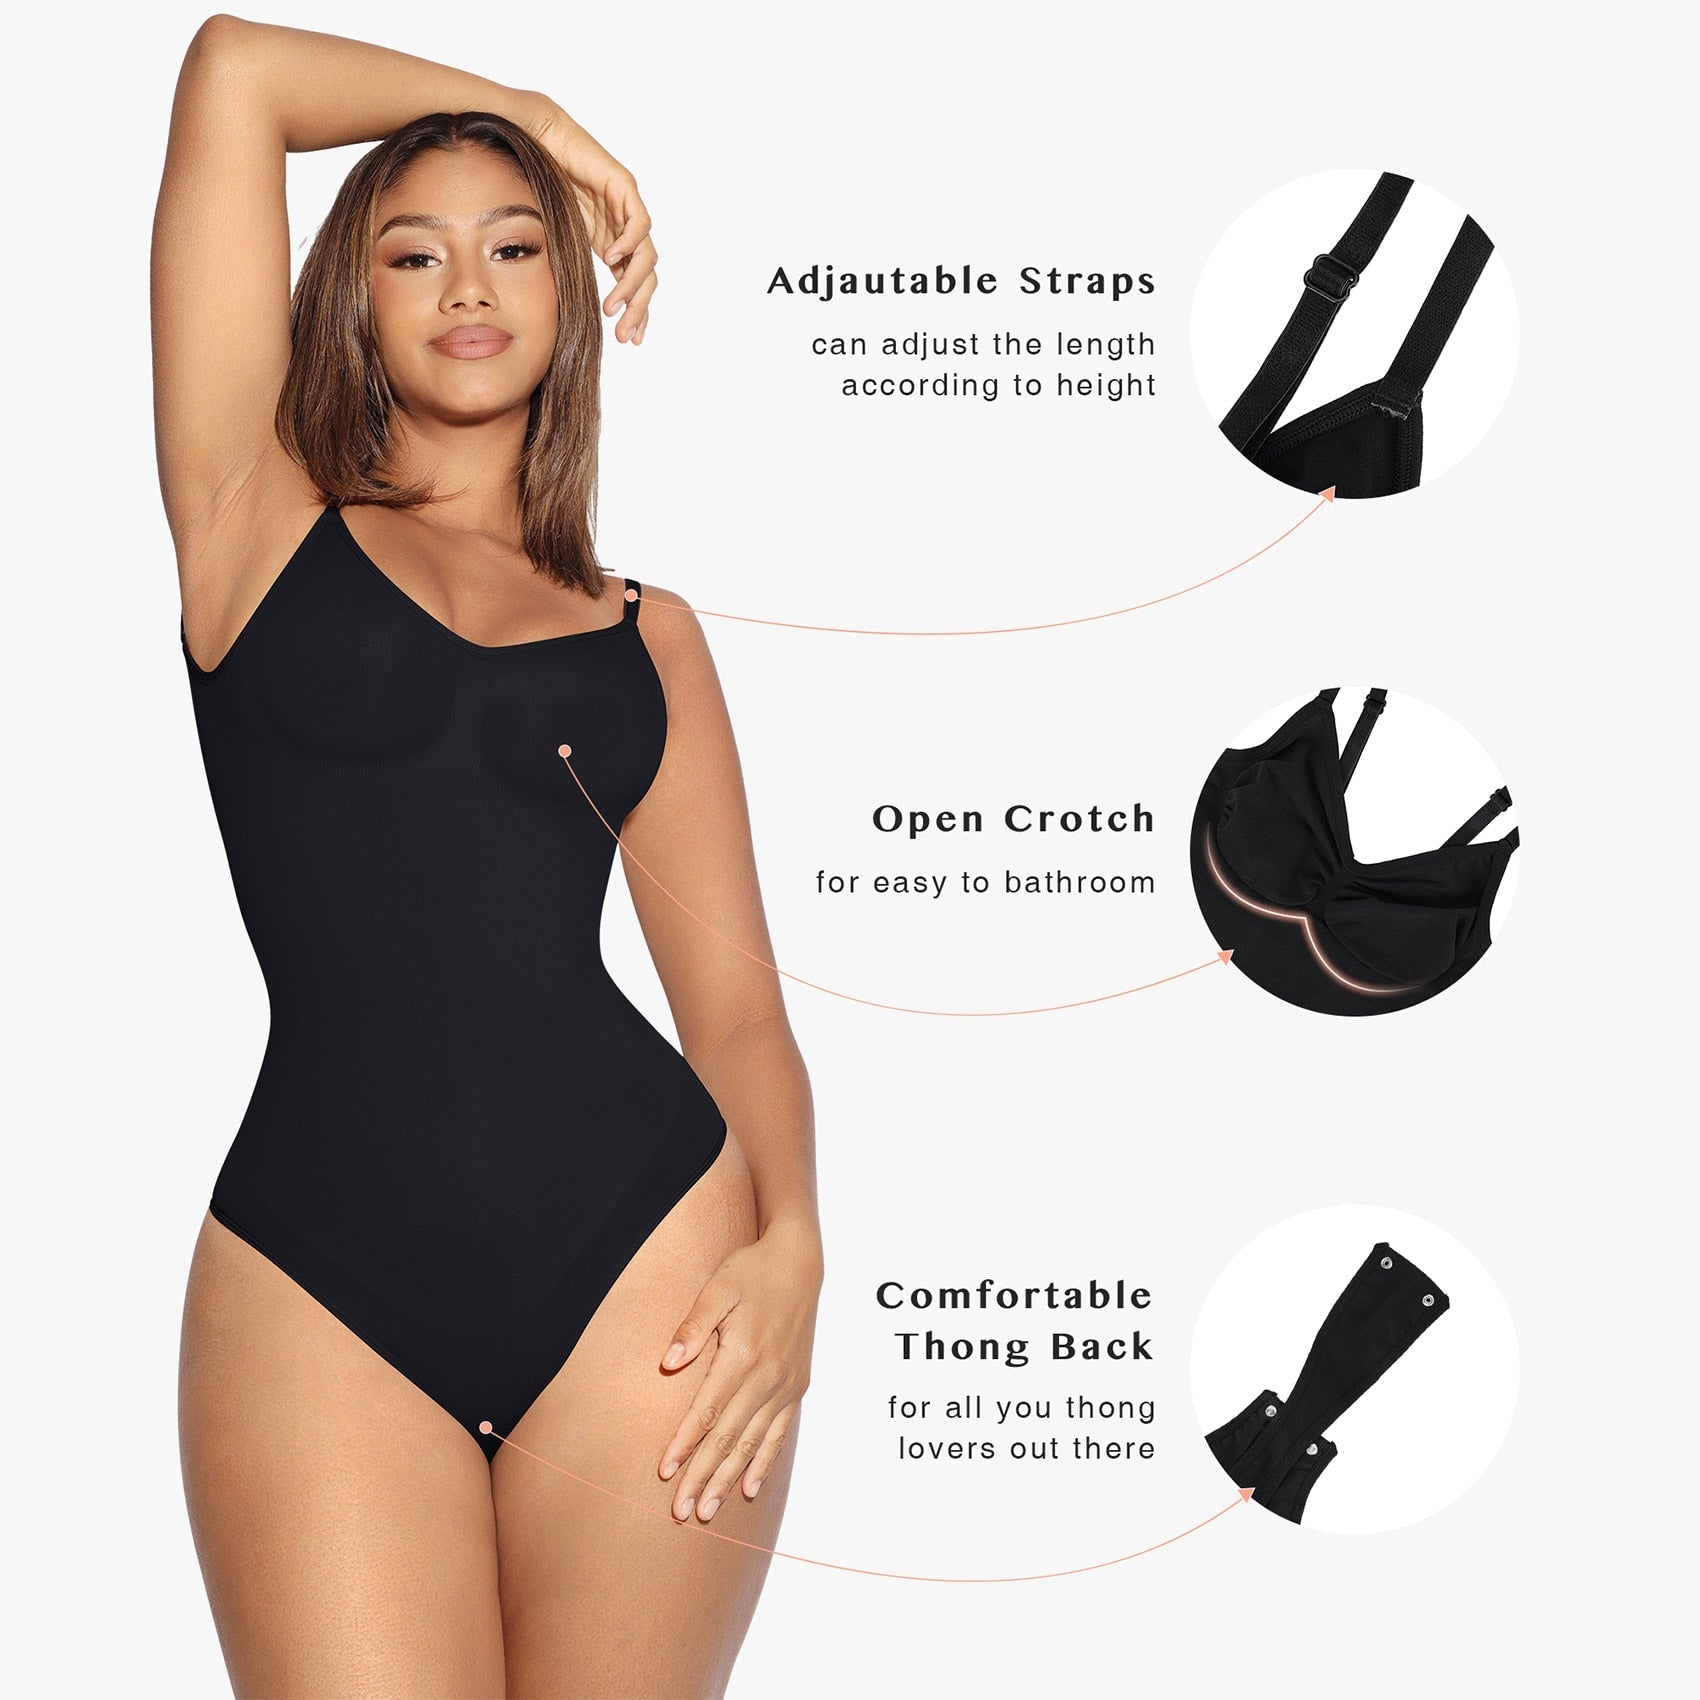 I'm plus-size and tried the viral Skims bodysuit dupe from  in an  L/XL - it made me look snatched